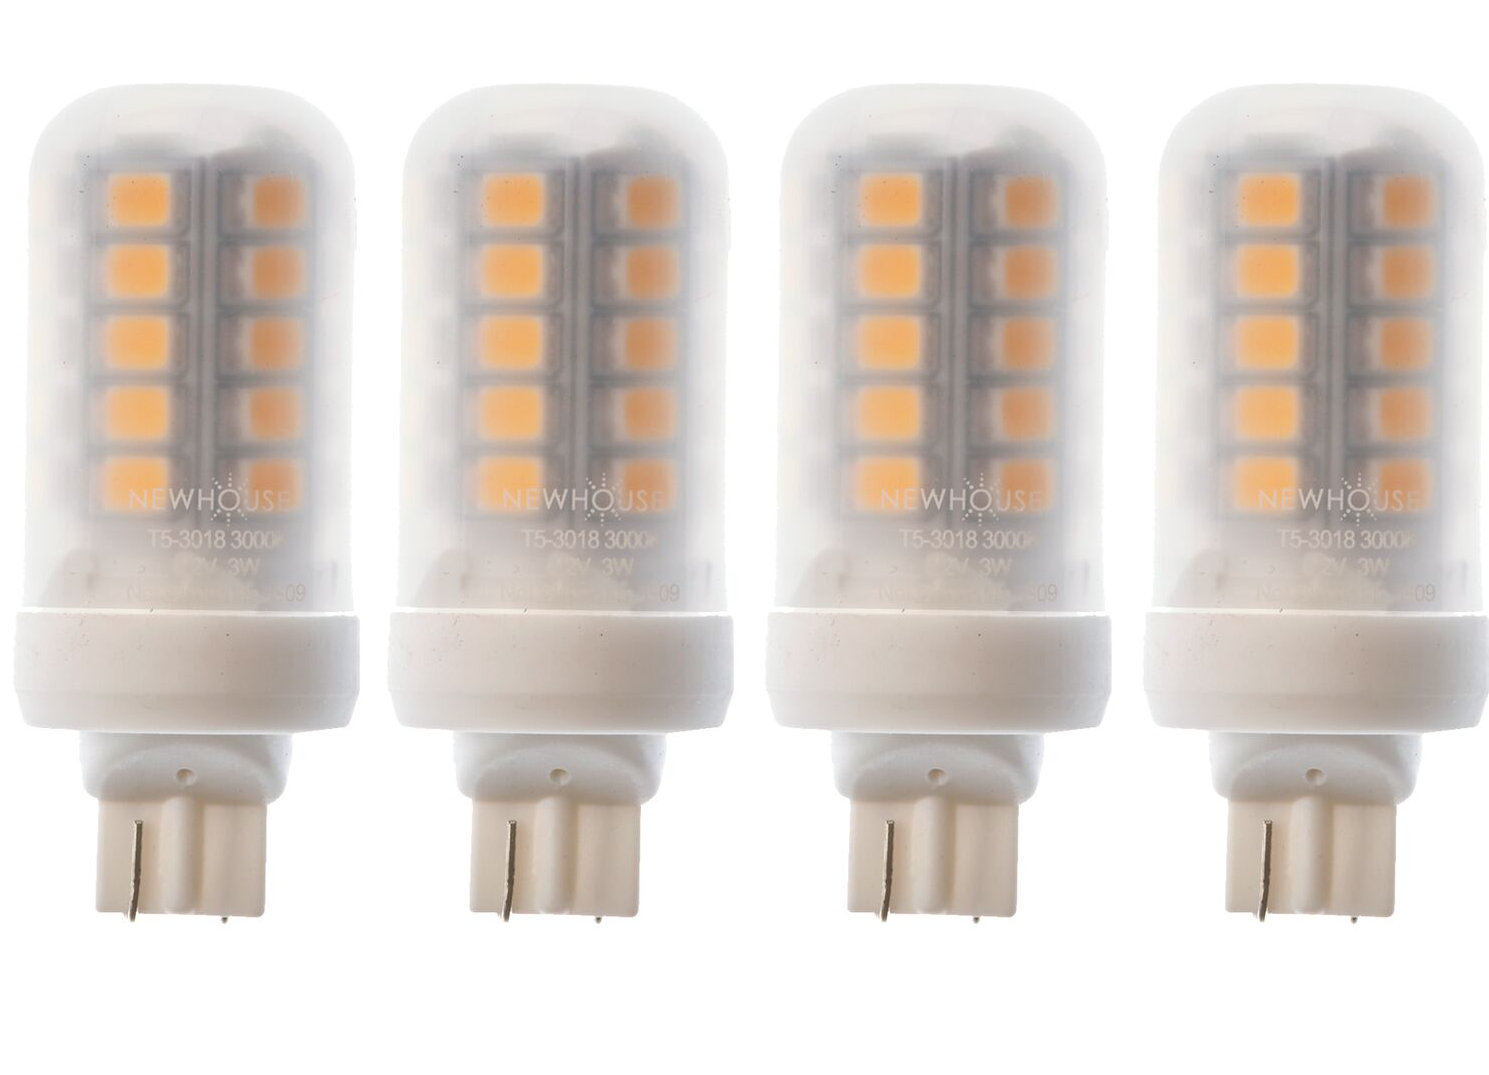 10 x G4 12D LED Capsule Light Bulb Replacement Lamps Dimmable C6W6 